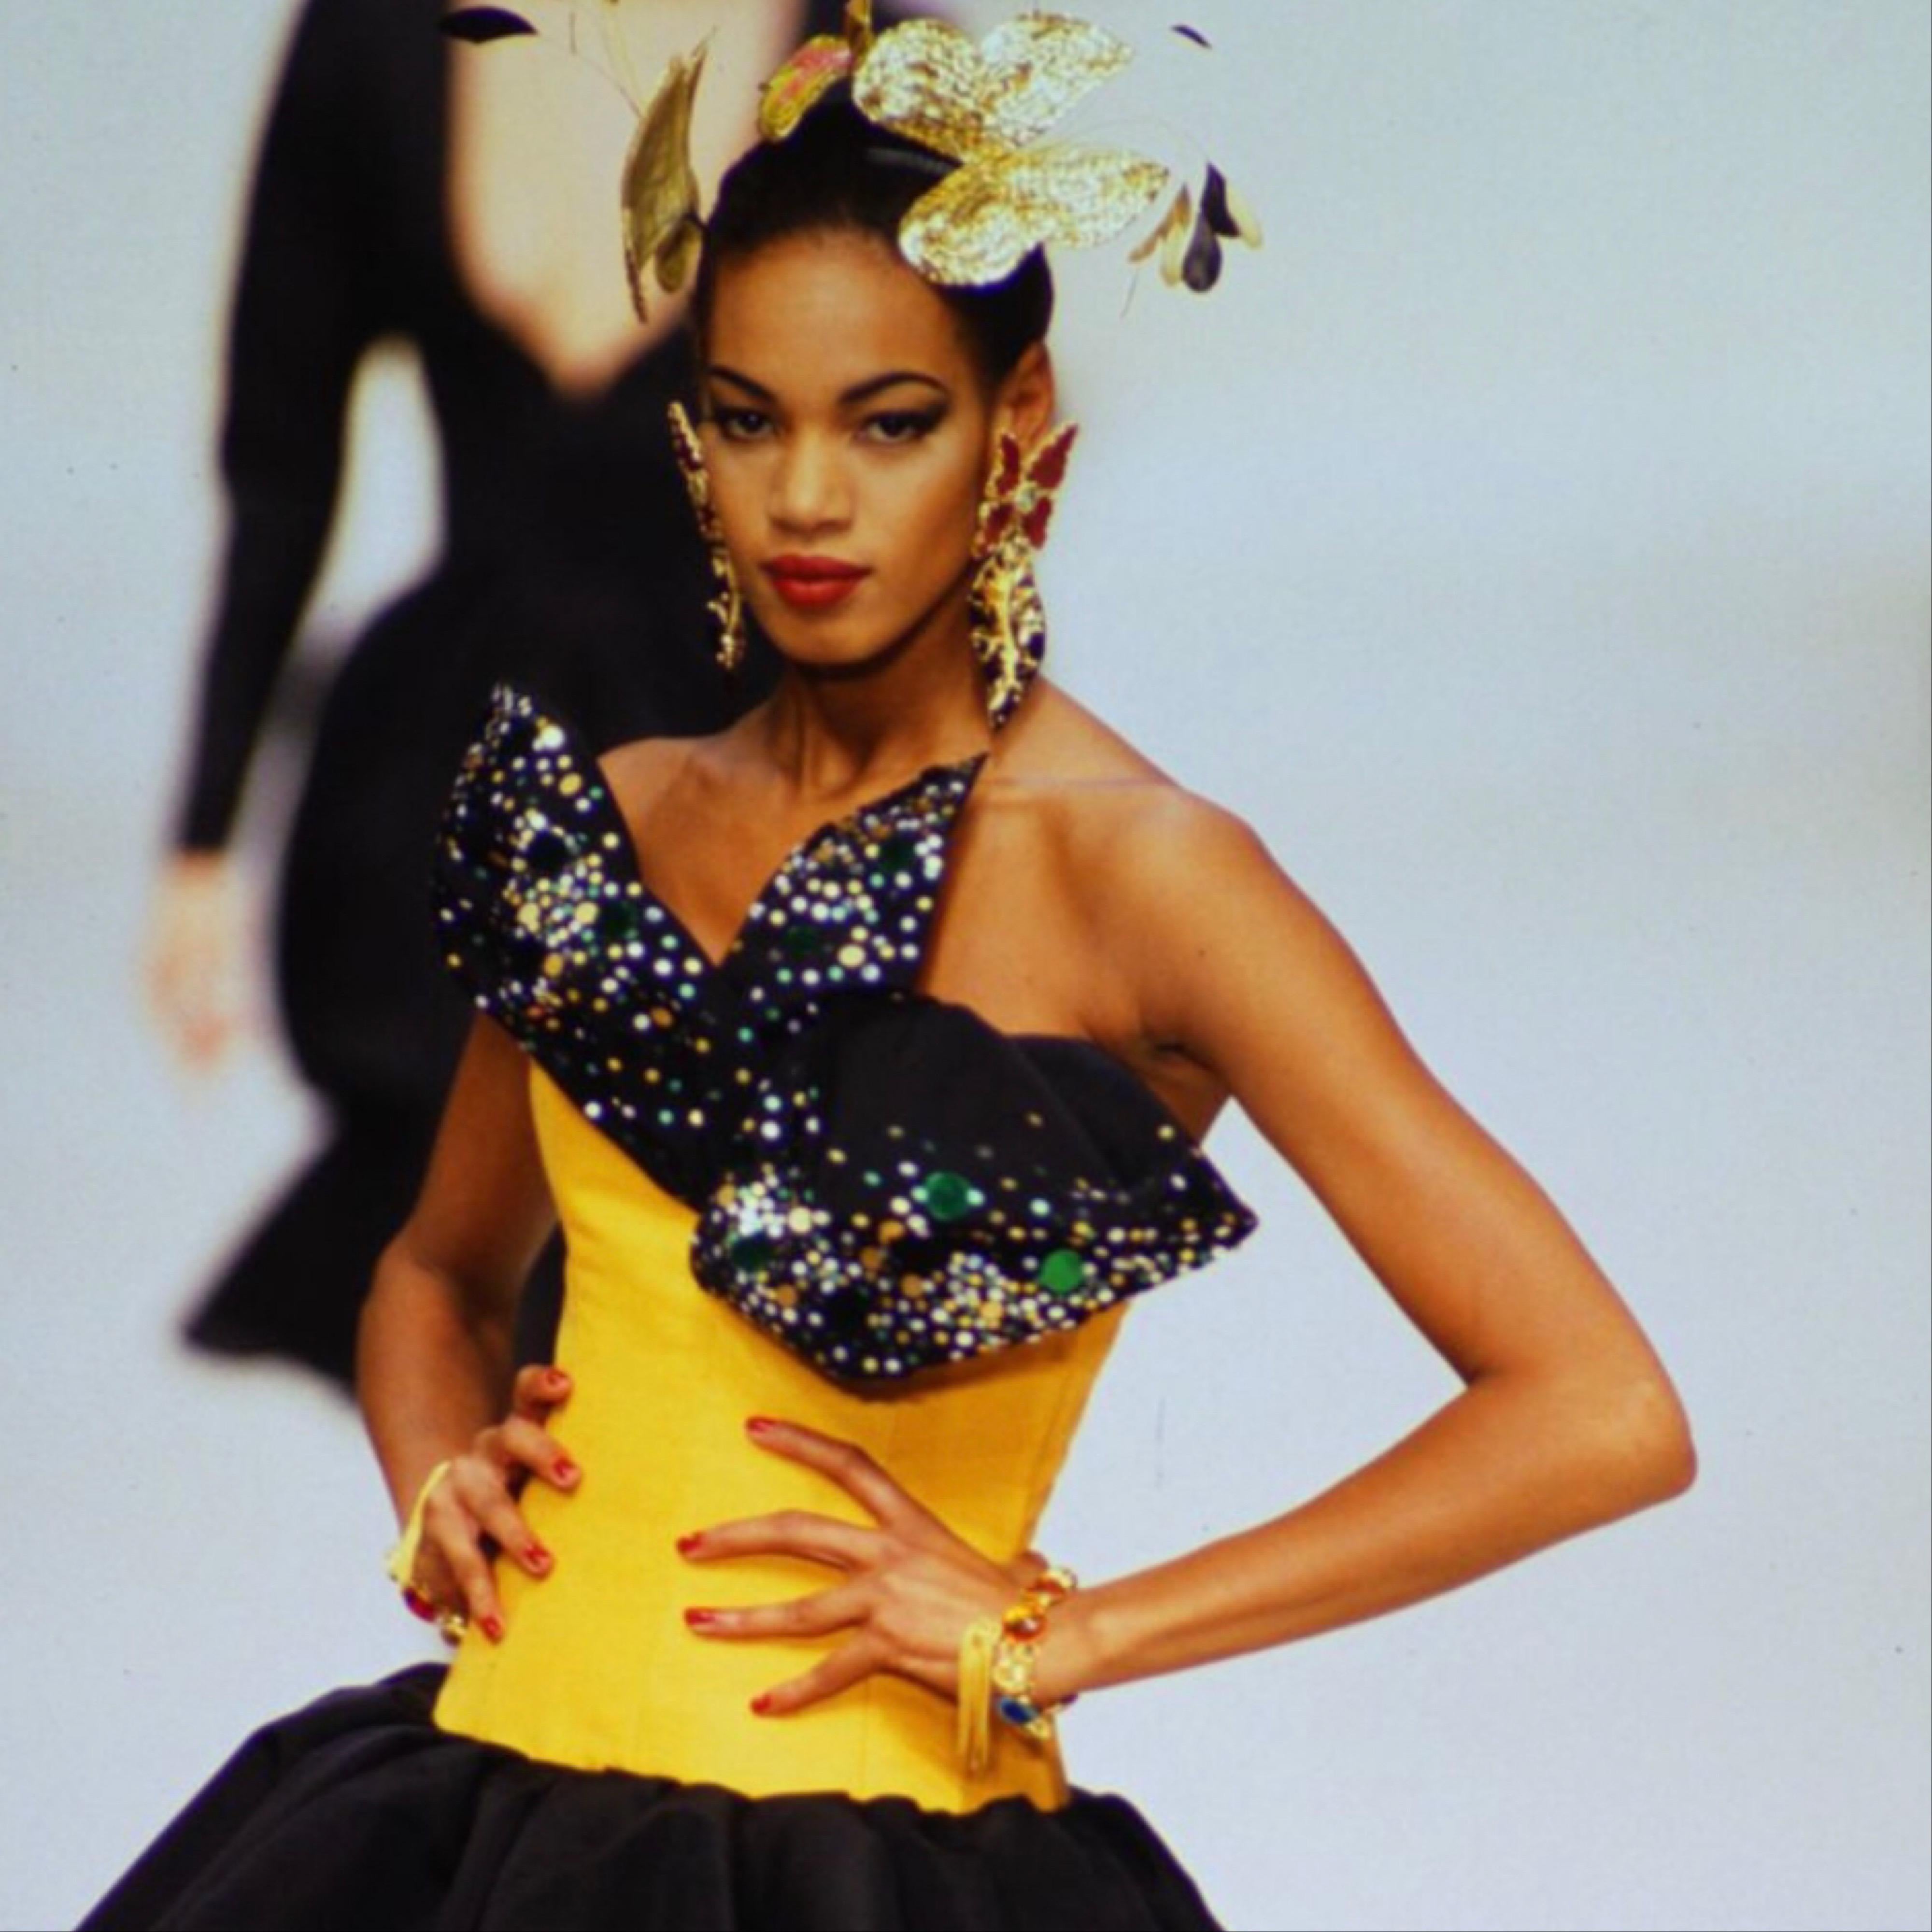 Yves Saint Laurent’s Spring/Summer 1993 collection was a spectacular carnival of color with an underlying garden theme. Artistic hats, vibrant fabrics, and of course, stunning statement jewelry to take every look to the next level. From that